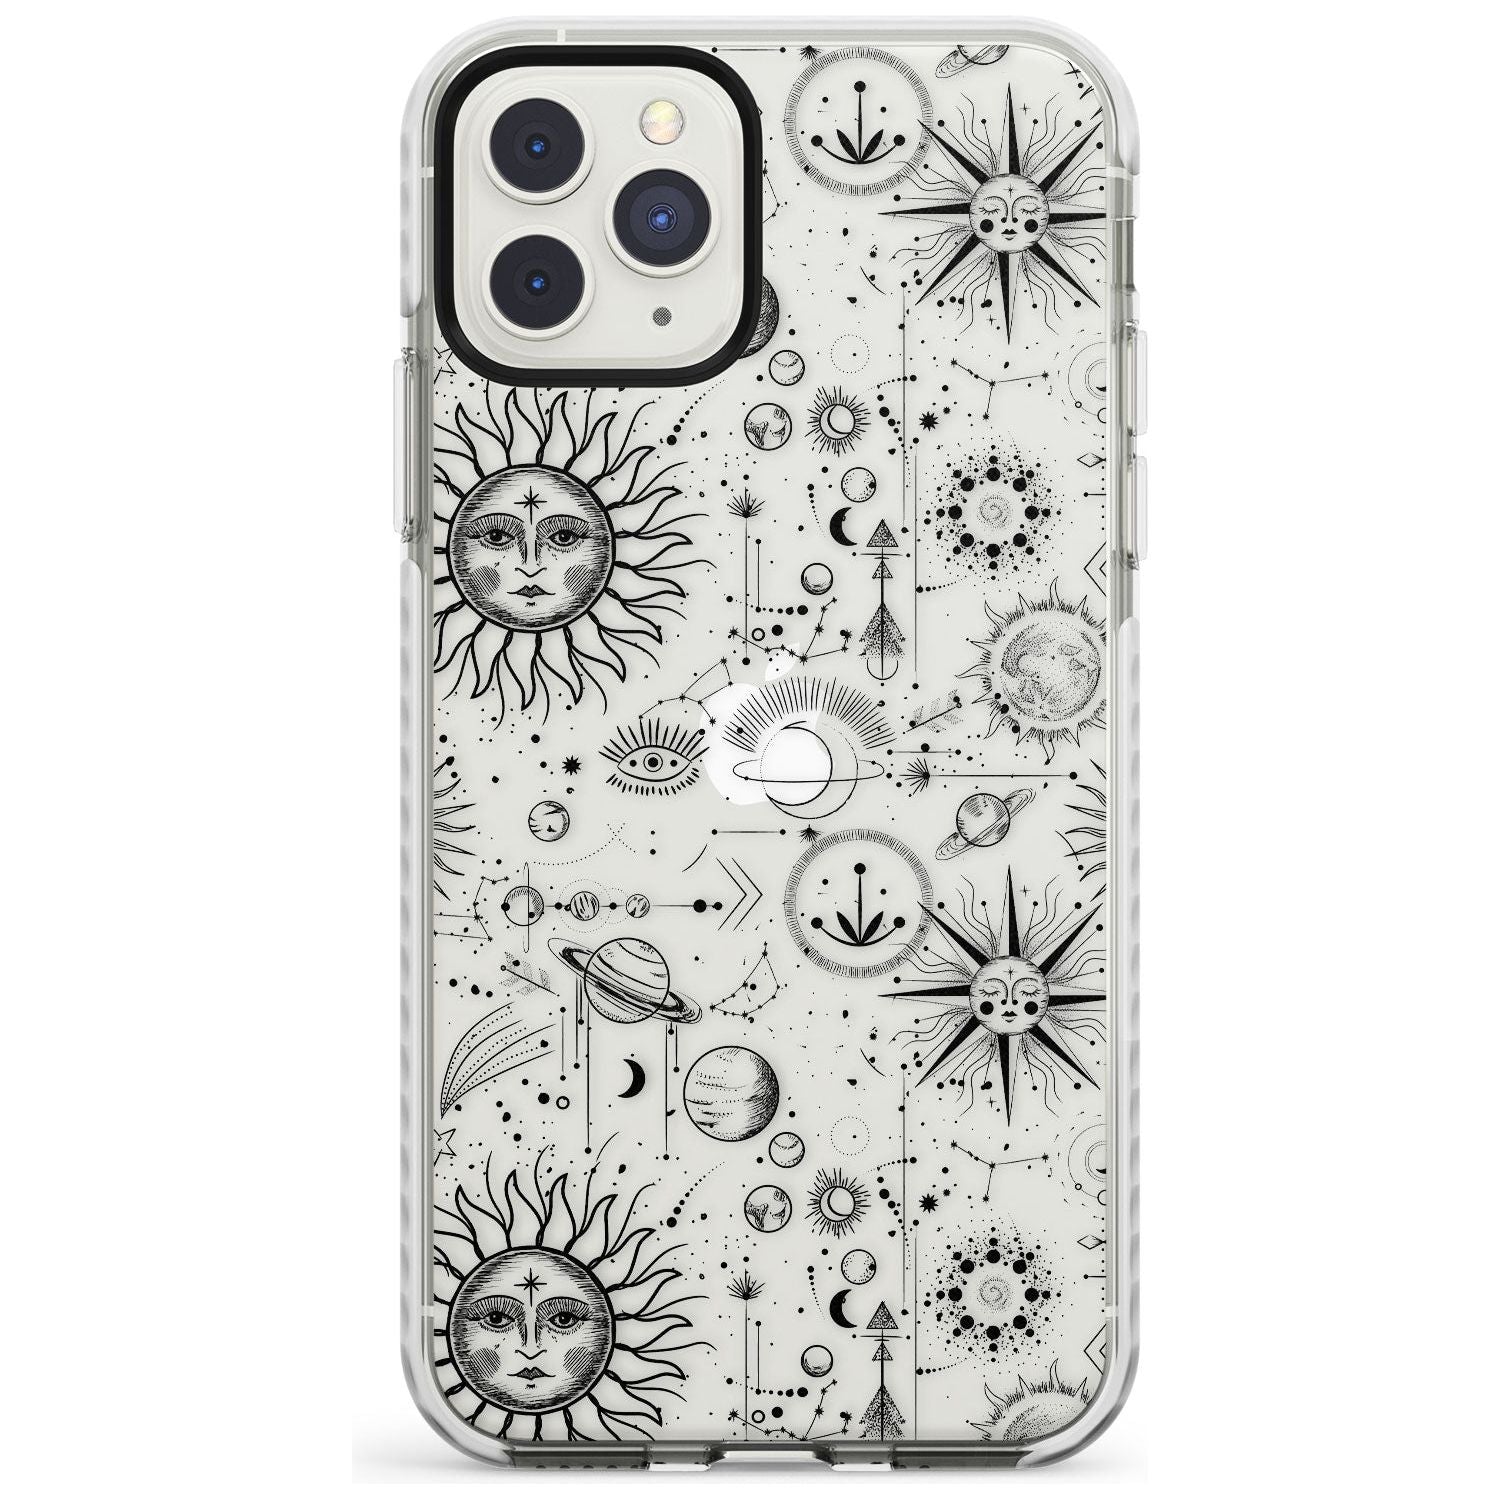 Suns & Planets Astrological Impact Phone Case for iPhone 11 Pro Max